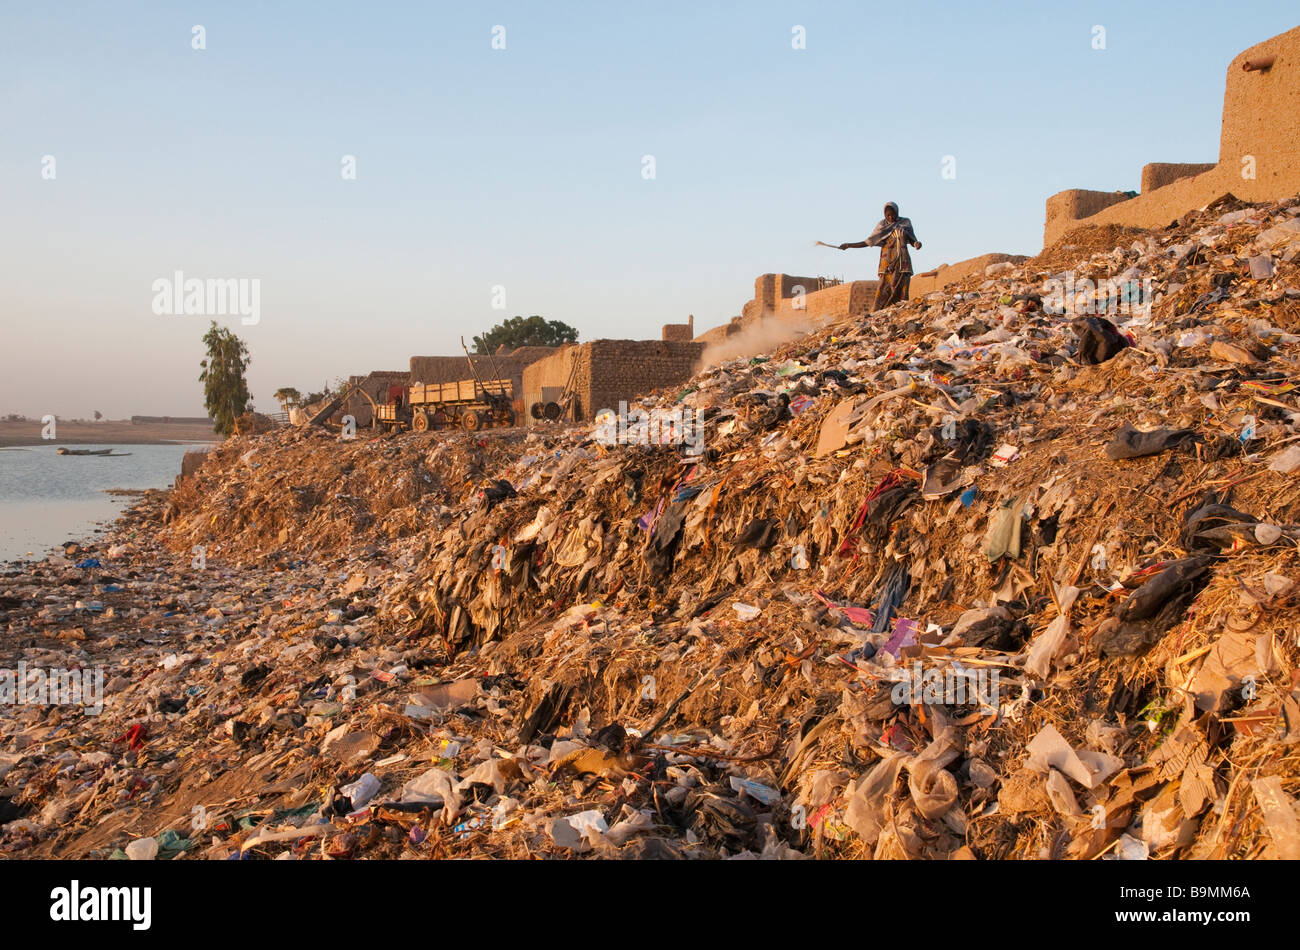 West africa Mali Djenne Rubbish tip on the bank of the bani river Stock Photo